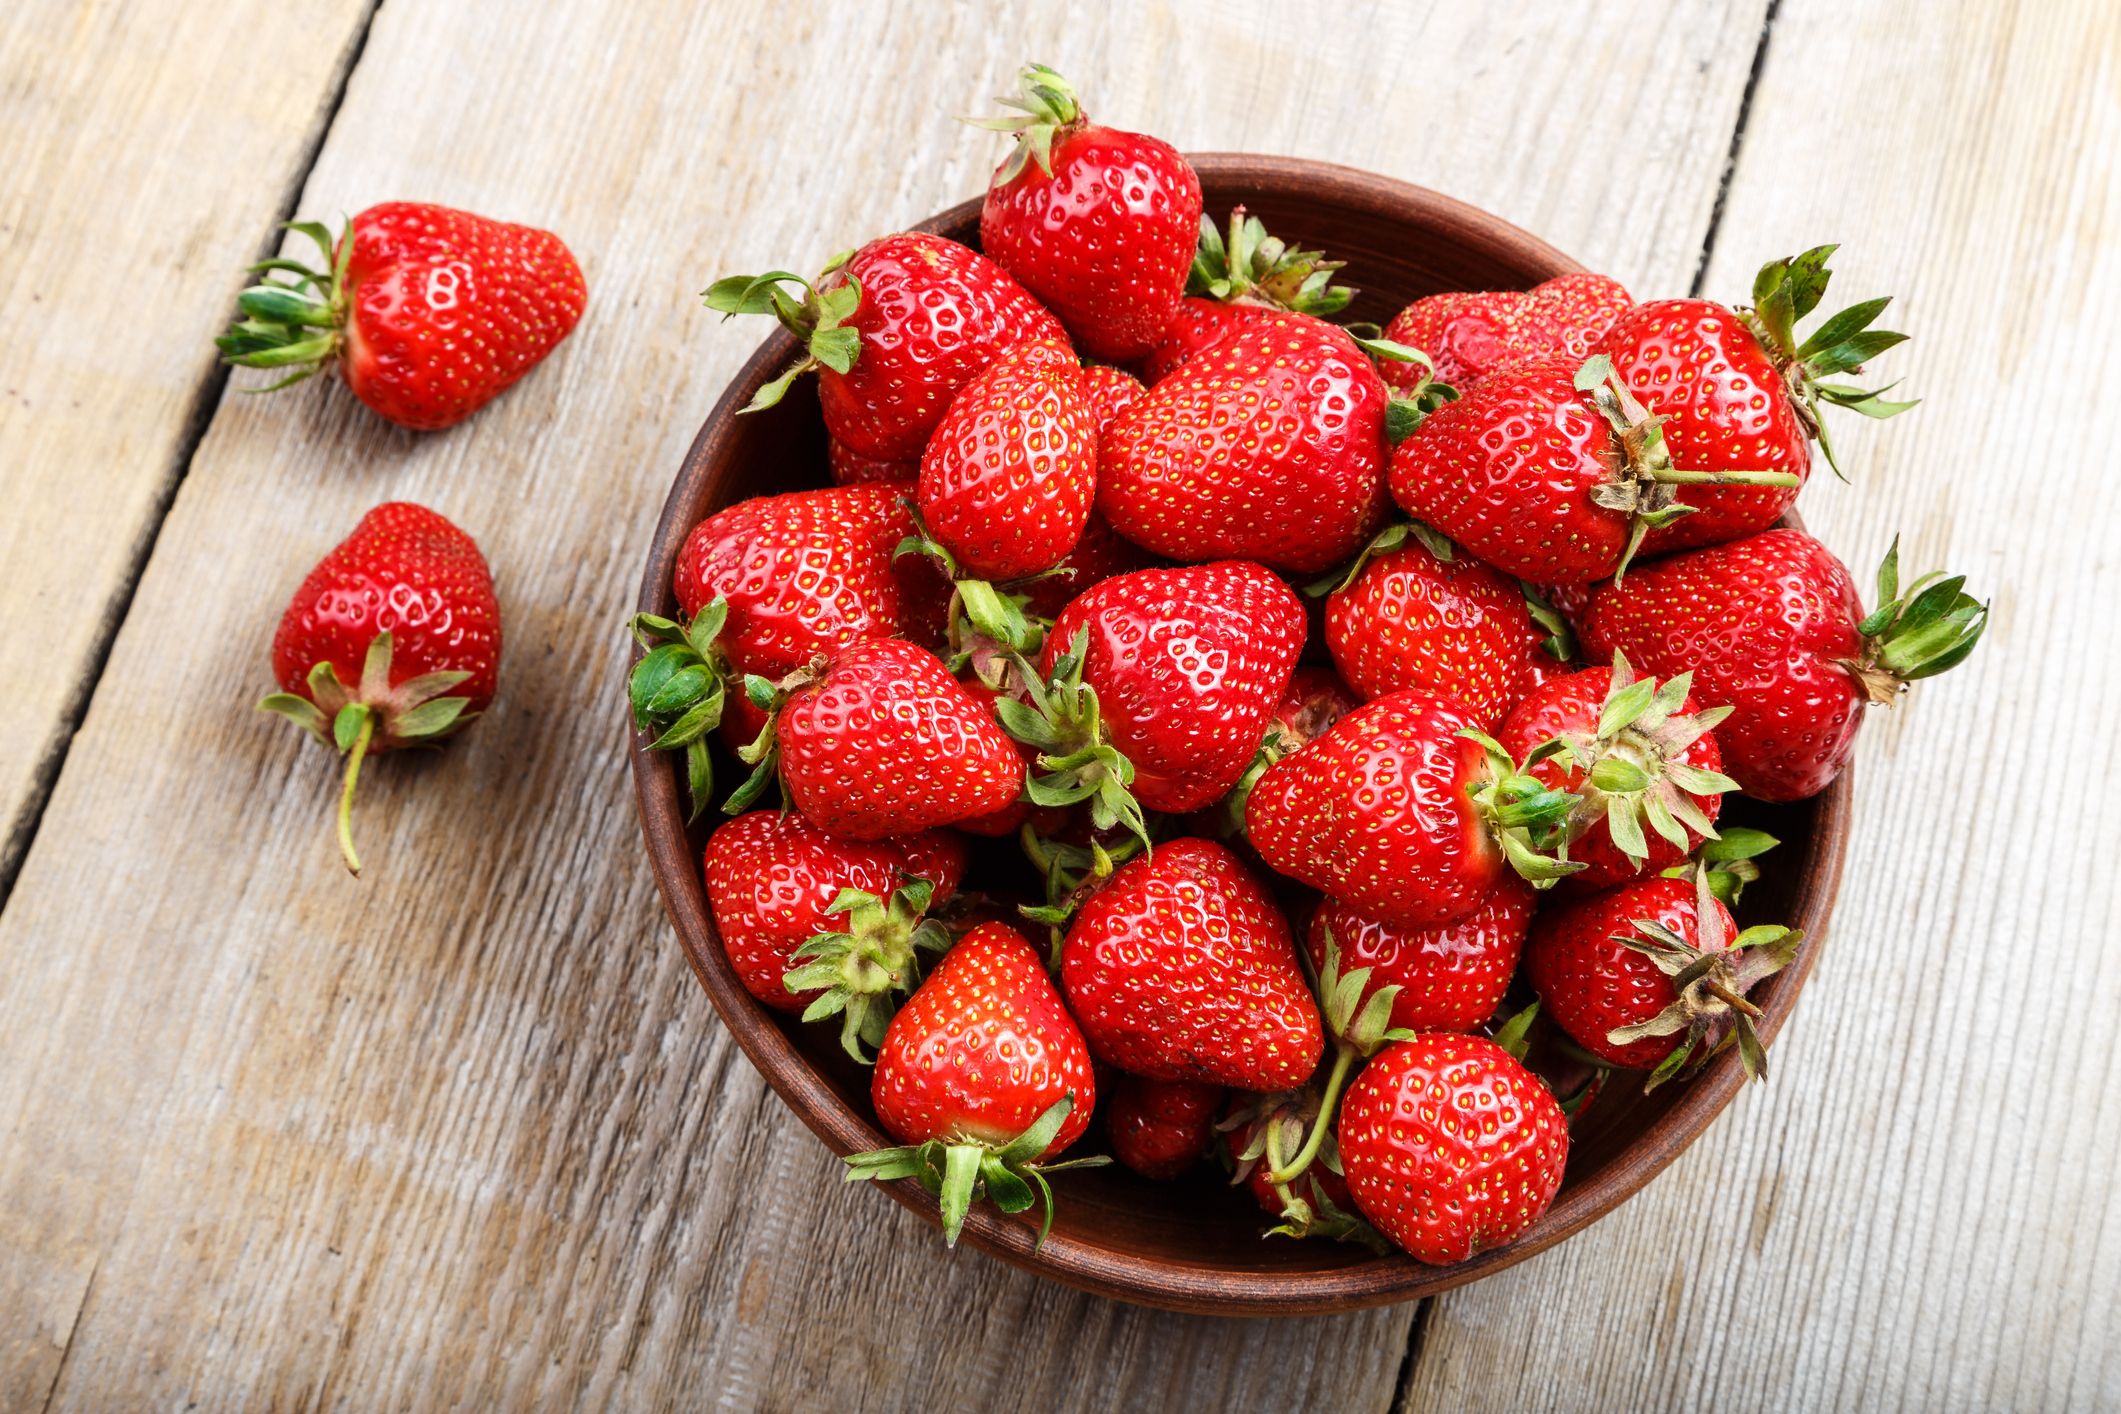 Fruits that are healthy for men include strawberries